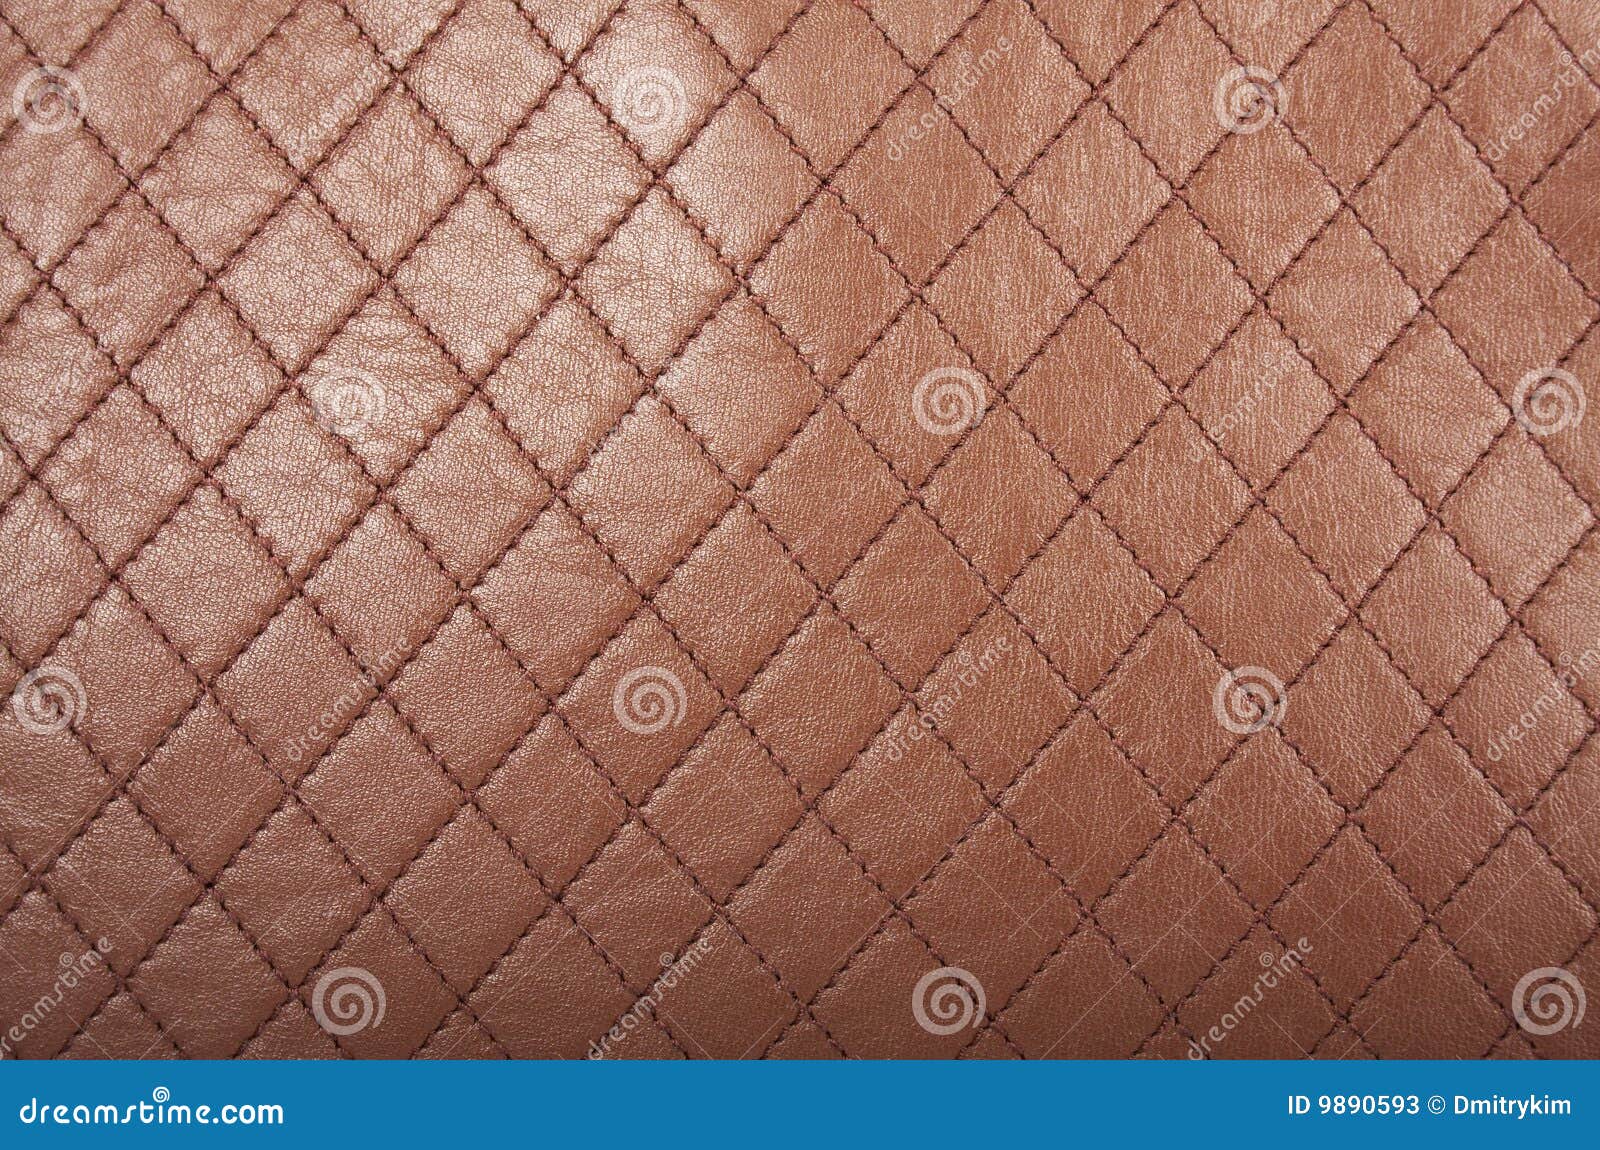 16+ Thousand Crumpled Leather Royalty-Free Images, Stock Photos & Pictures